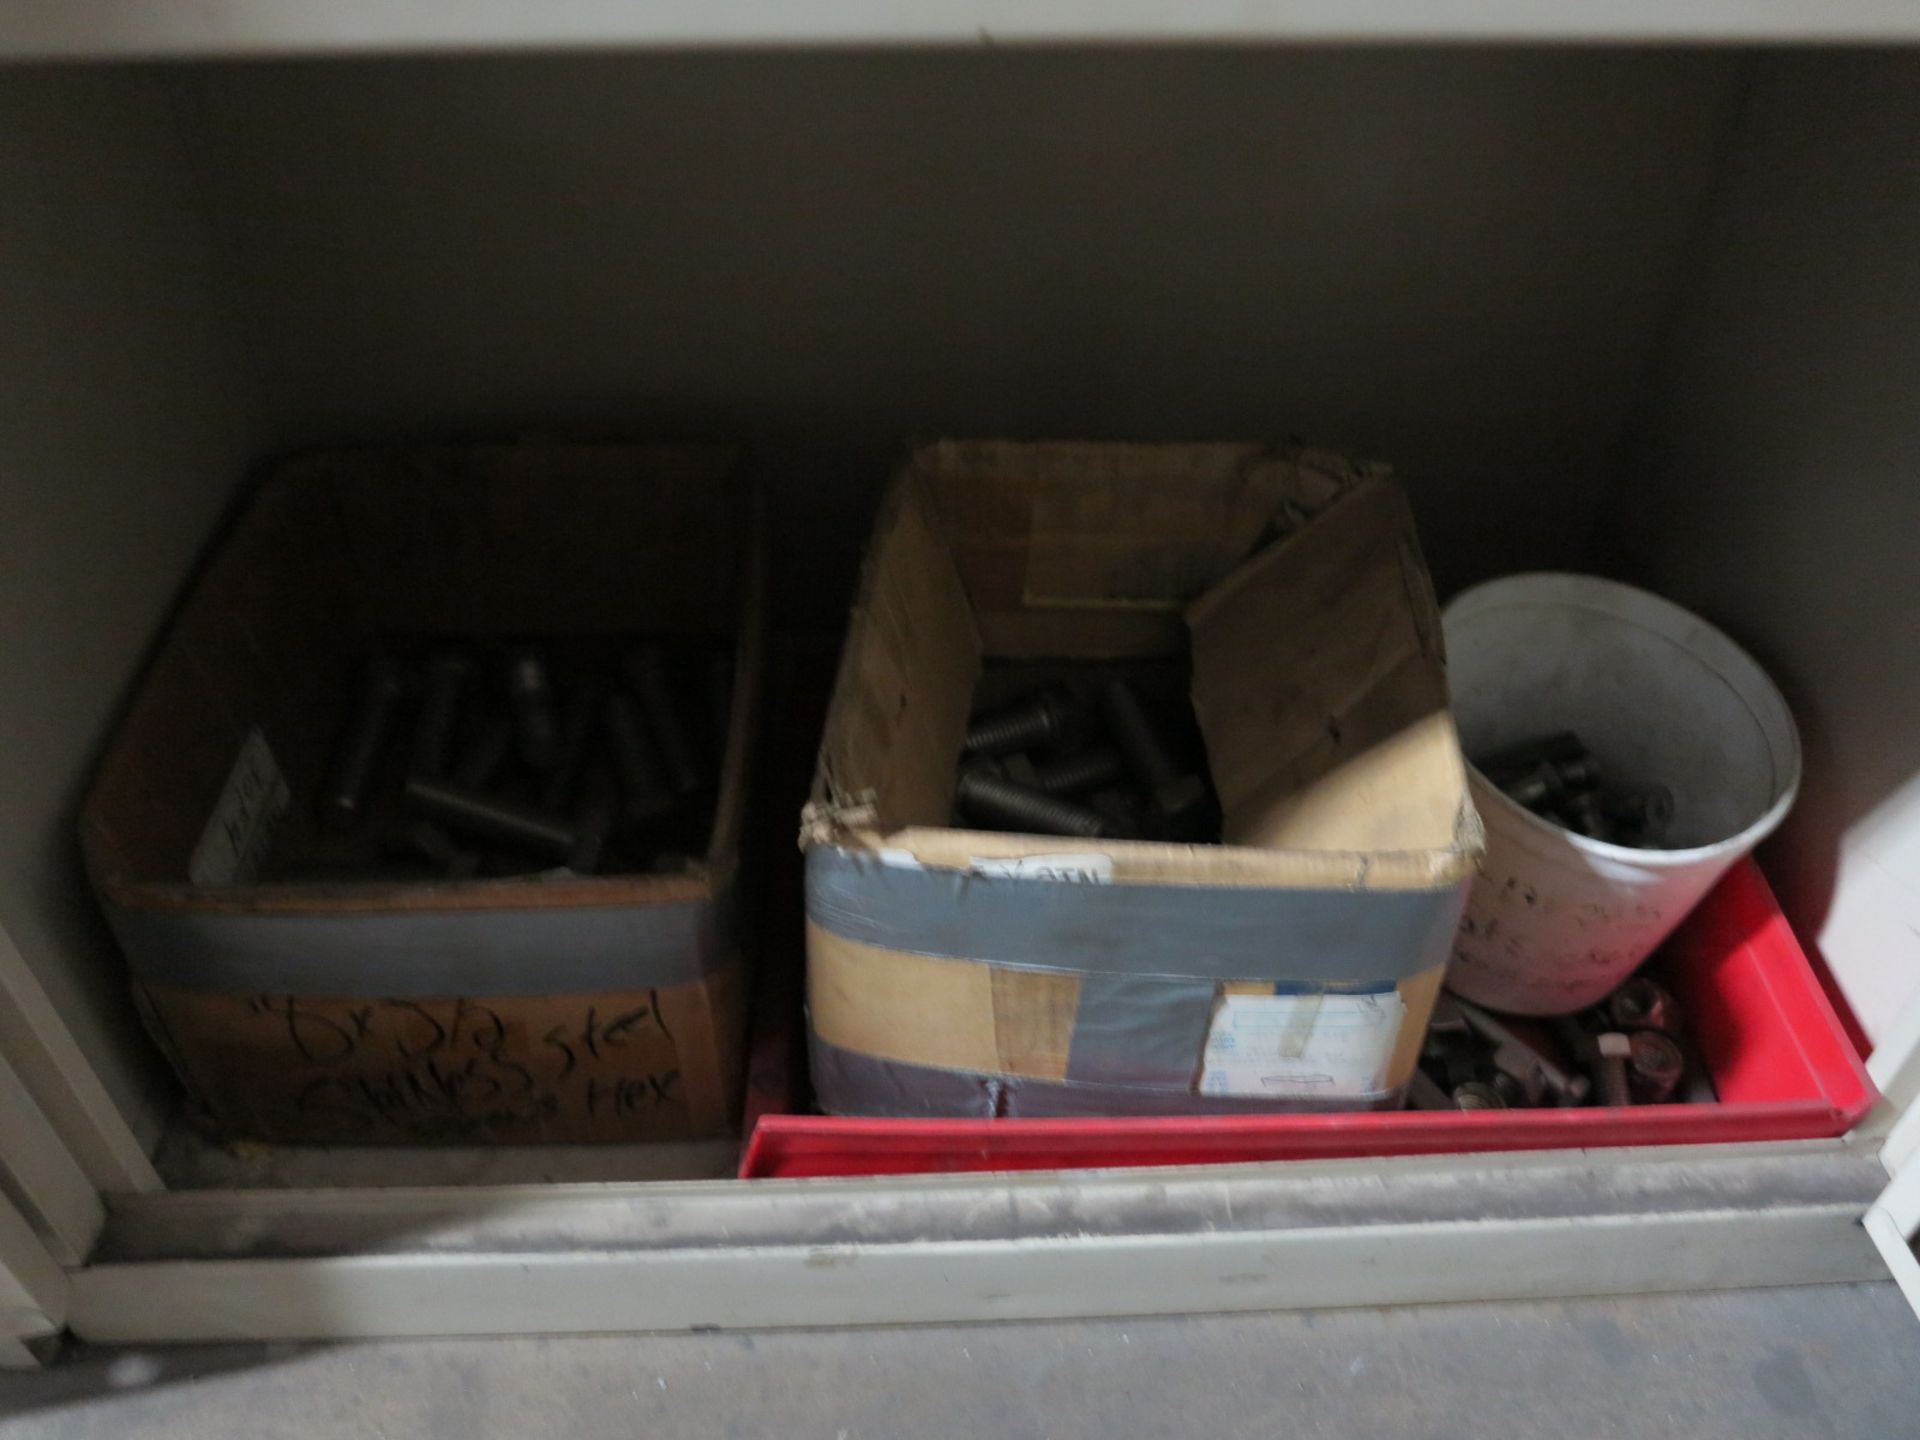 2-DOOR CABINET W/ CONTENTS OF MILLING CUTTERS AND MISC HARDWARE - Image 5 of 5